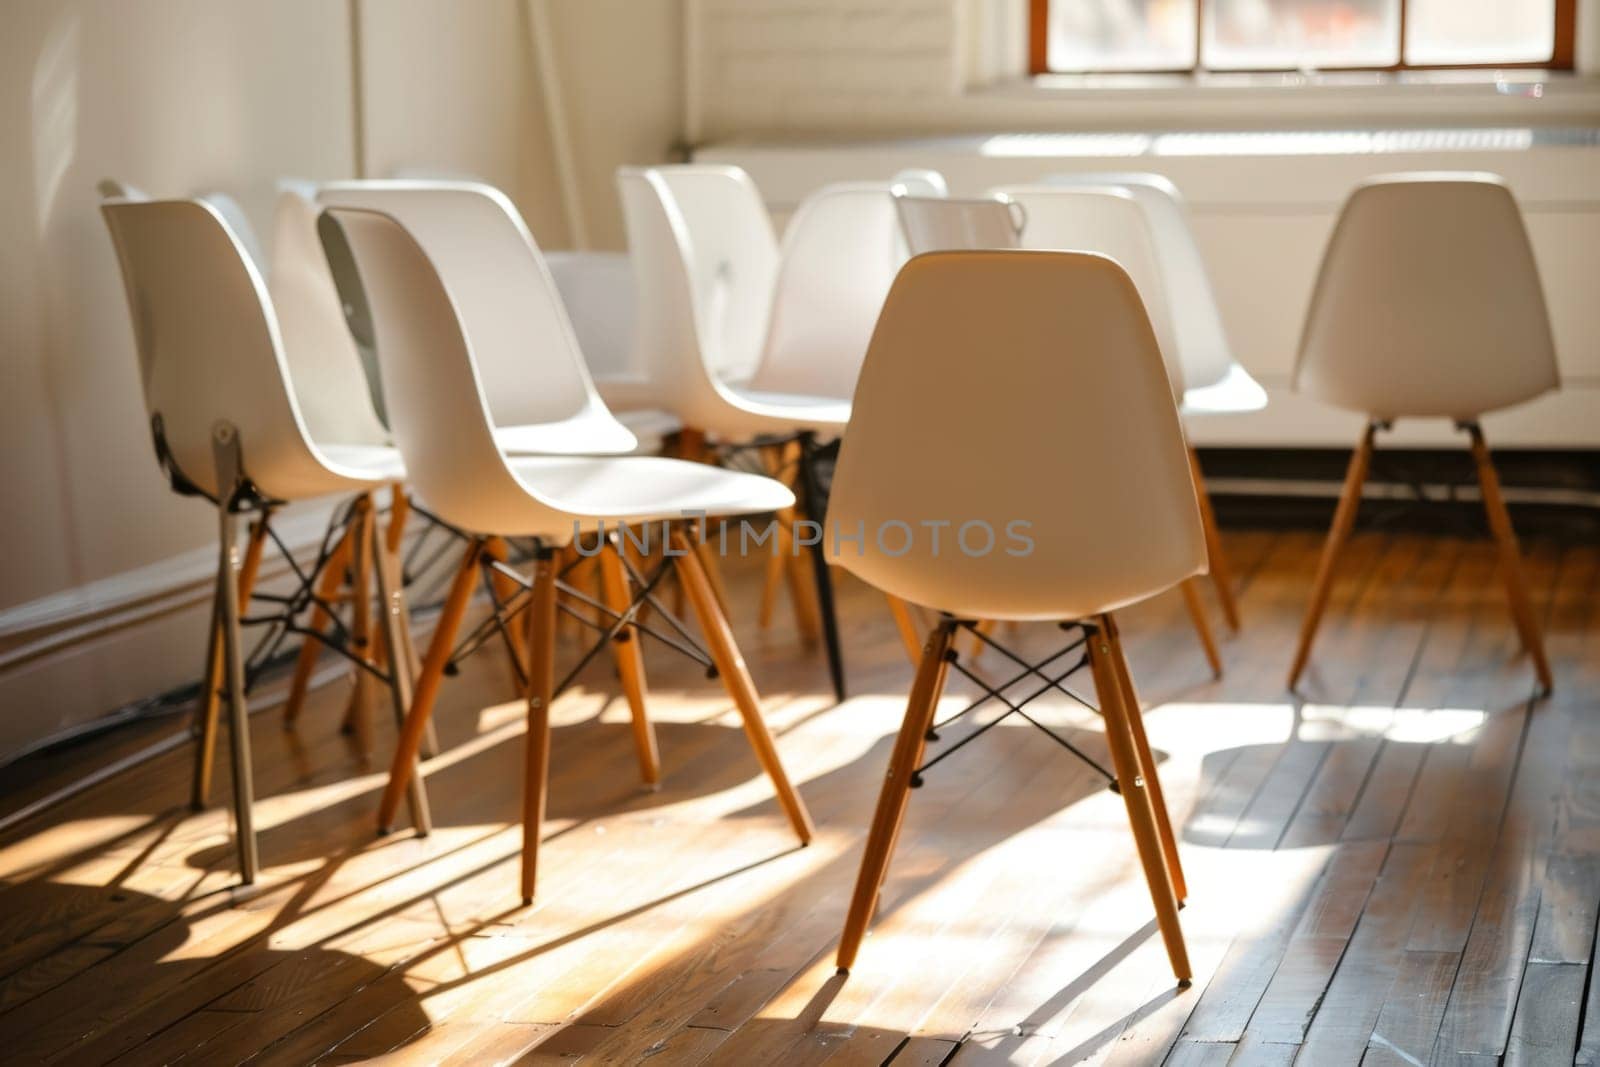 A warm, sunlit room with a circle of empty white chairs, suggesting an atmosphere of a recent or upcoming gathering